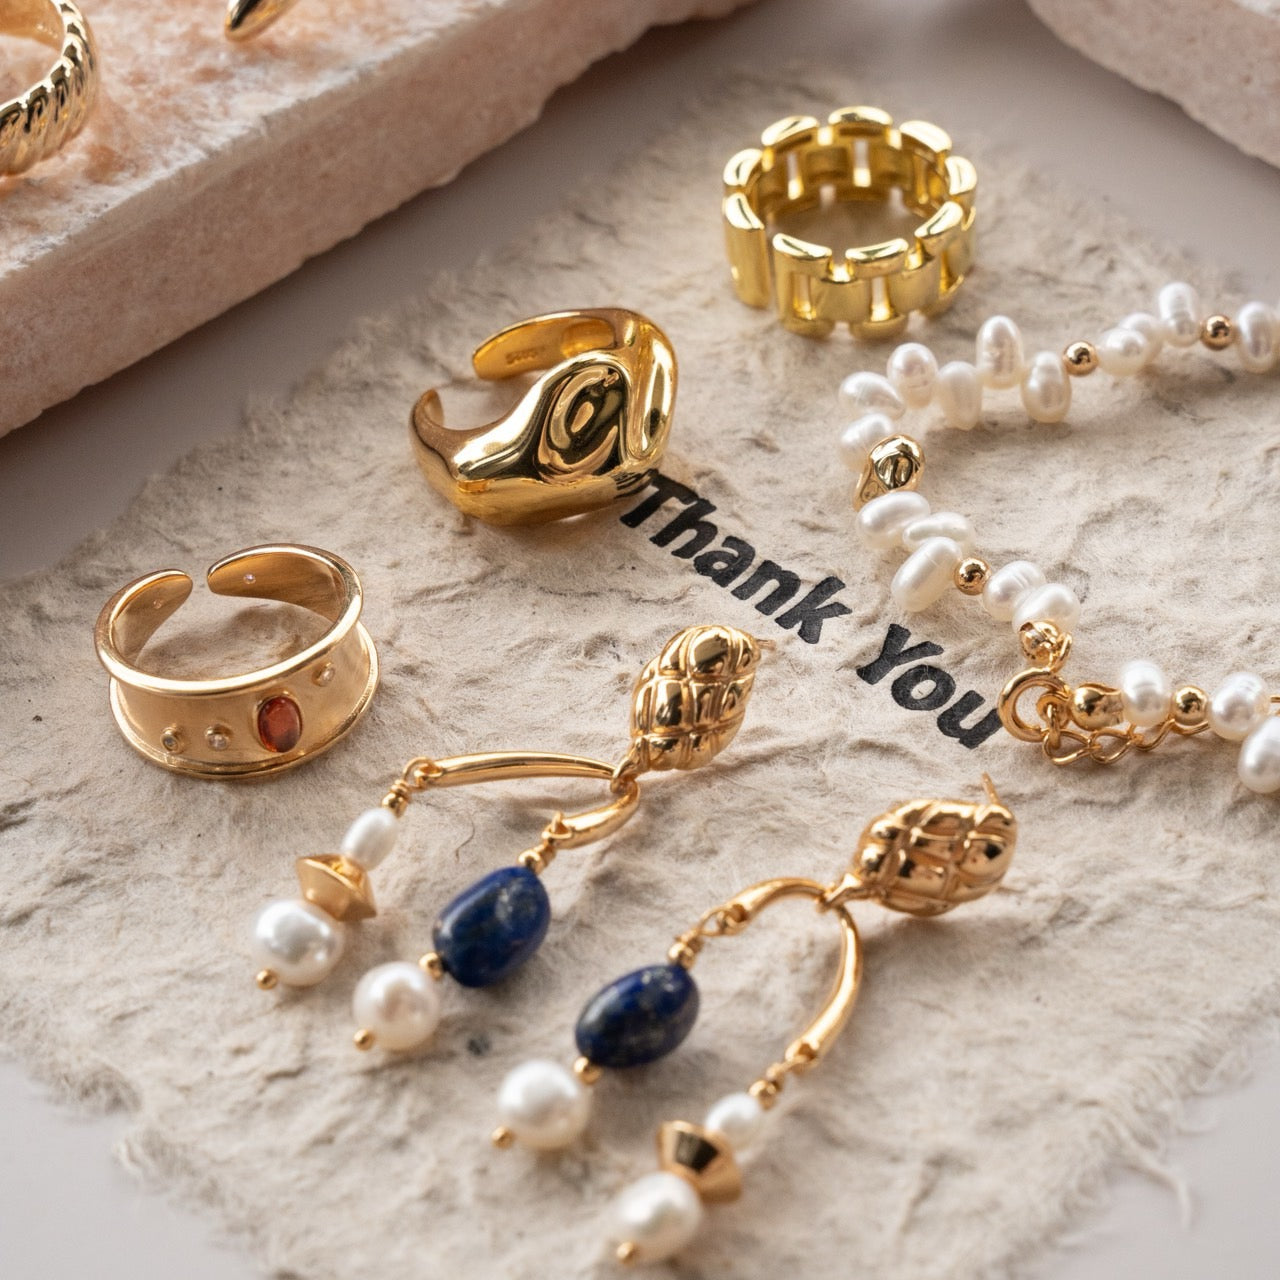 HOW TO MATCH JEWELRY FOR FALL & WINTER